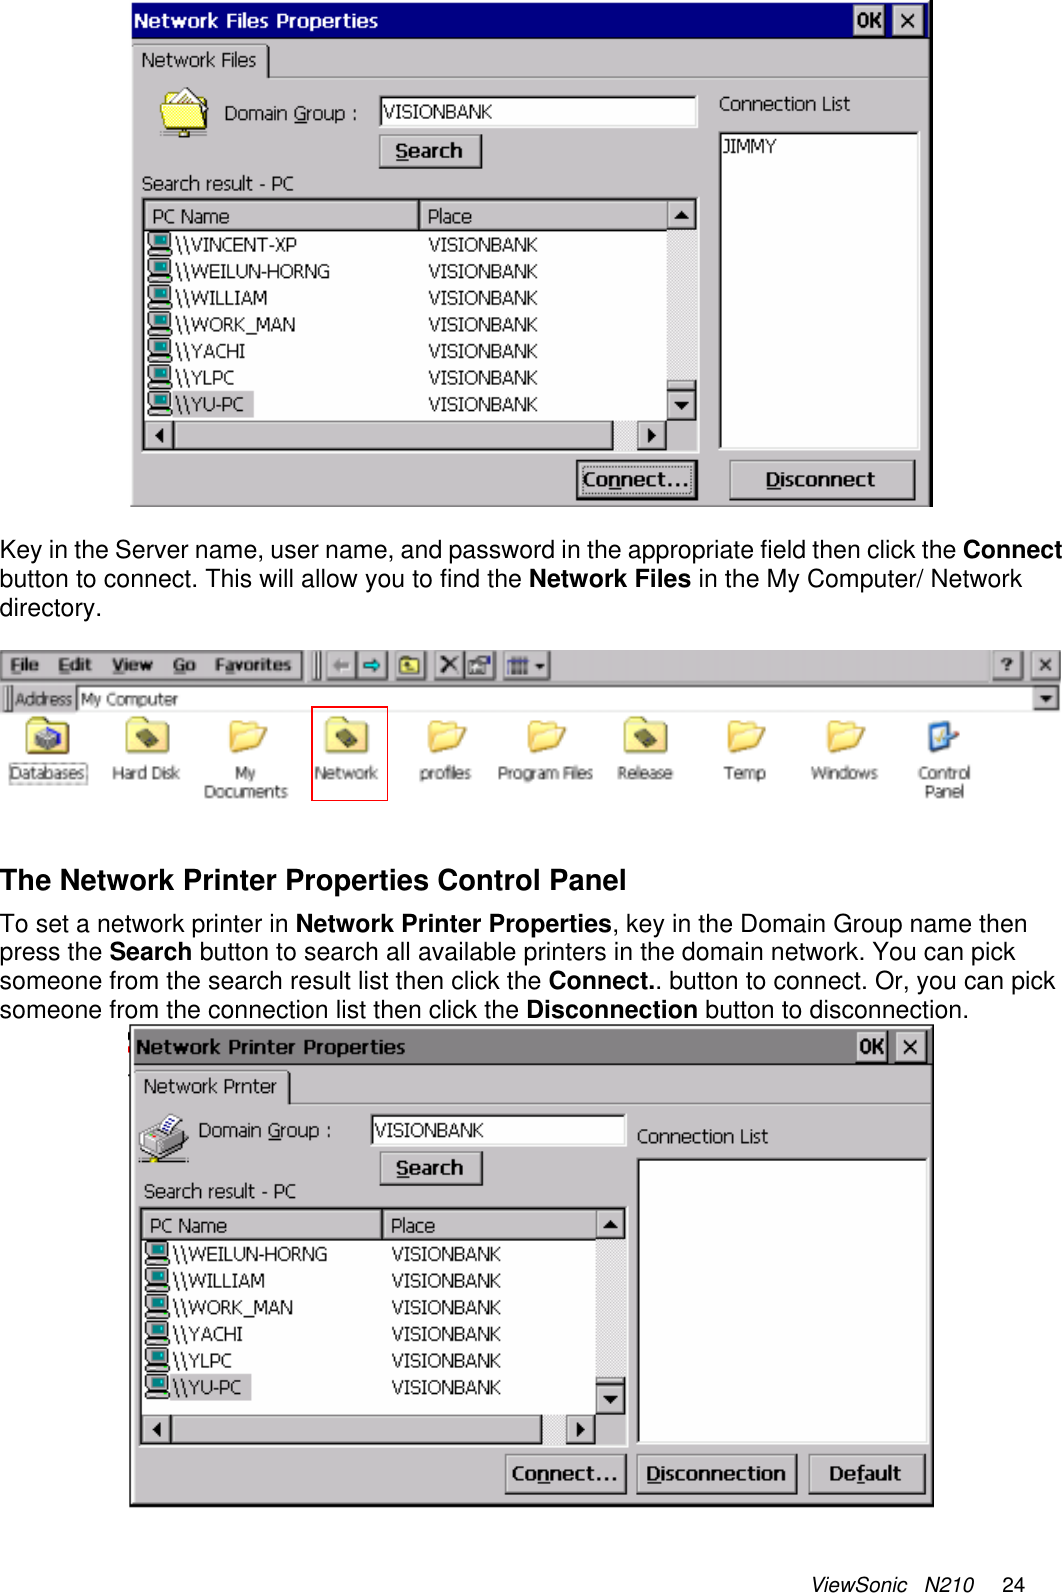 ViewSonic   N210     24   Key in the Server name, user name, and password in the appropriate field then click the Connect button to connect. This will allow you to find the Network Files in the My Computer/ Network directory.      The Network Printer Properties Control Panel To set a network printer in Network Printer Properties, key in the Domain Group name then press the Search button to search all available printers in the domain network. You can pick someone from the search result list then click the Connect.. button to connect. Or, you can pick someone from the connection list then click the Disconnection button to disconnection.   